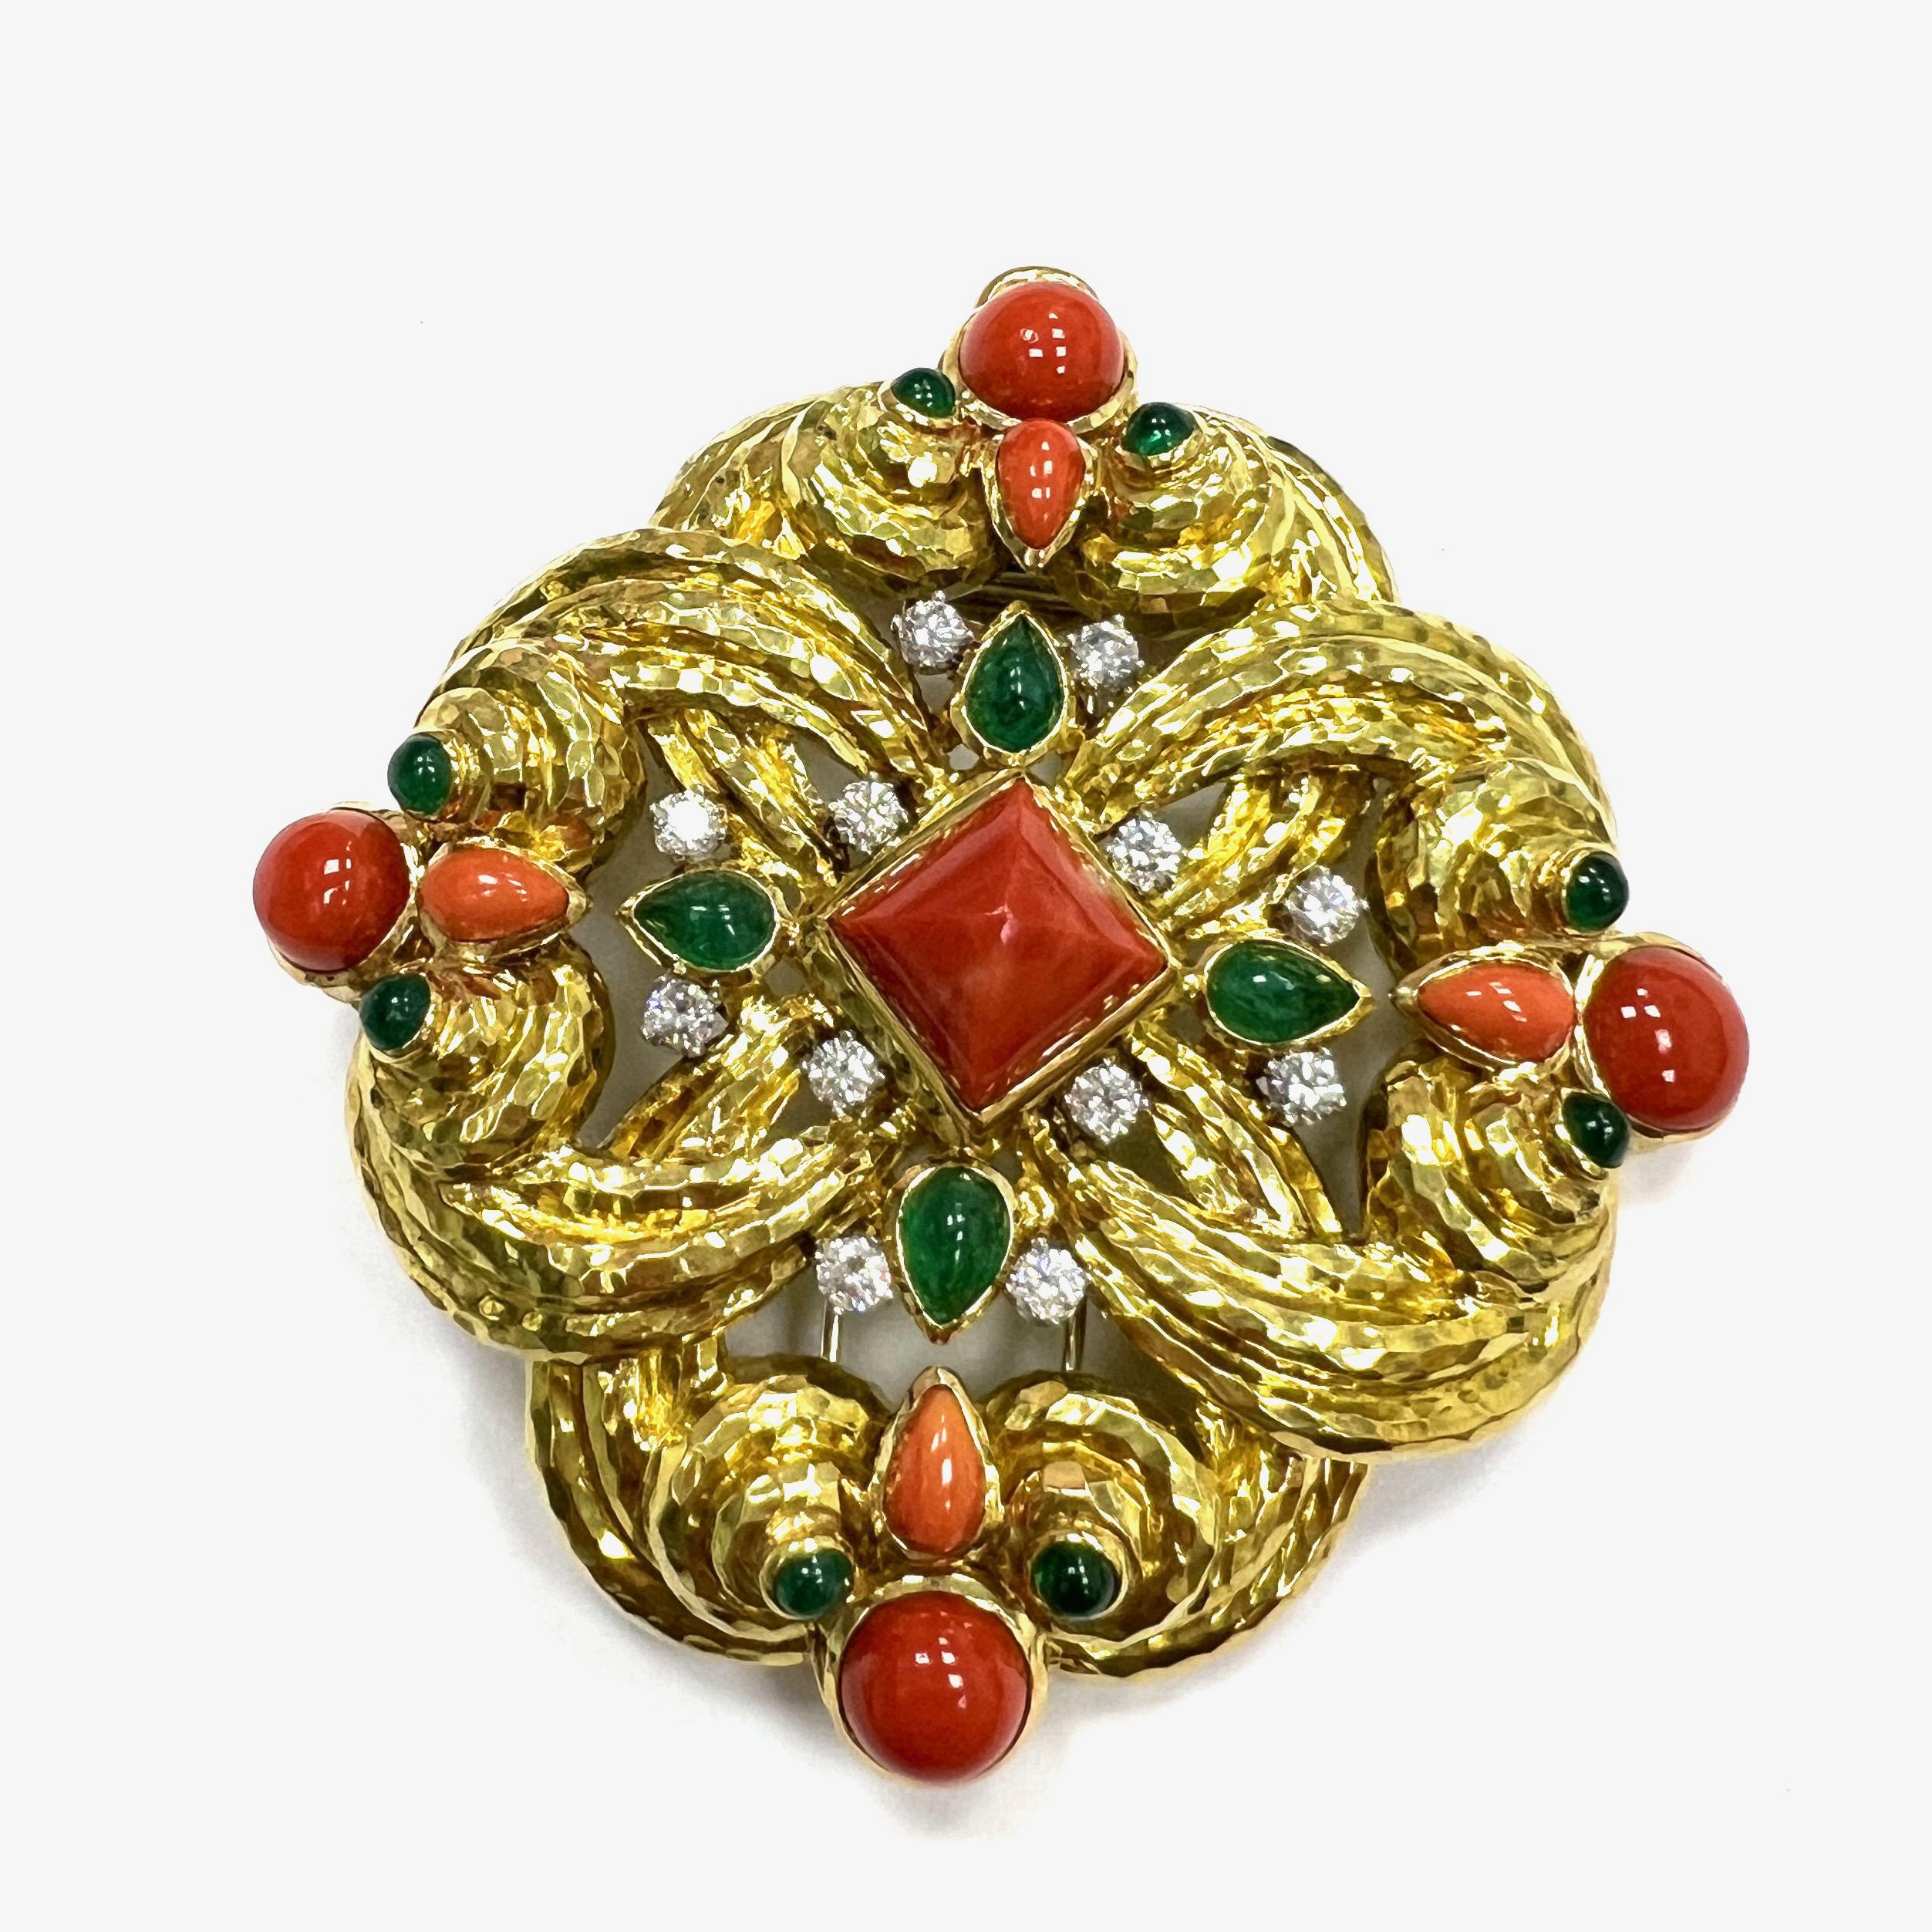 David Webb One of A Kind Coral Emerald 18k Yellow Gold Pendant Brooch

Cabochon and uncarved coral, cabochon emeralds of approximately 3.5 carats, round-cut diamonds of approximately 2 carats; set on hammered 18 karat yellow gold and platinum;